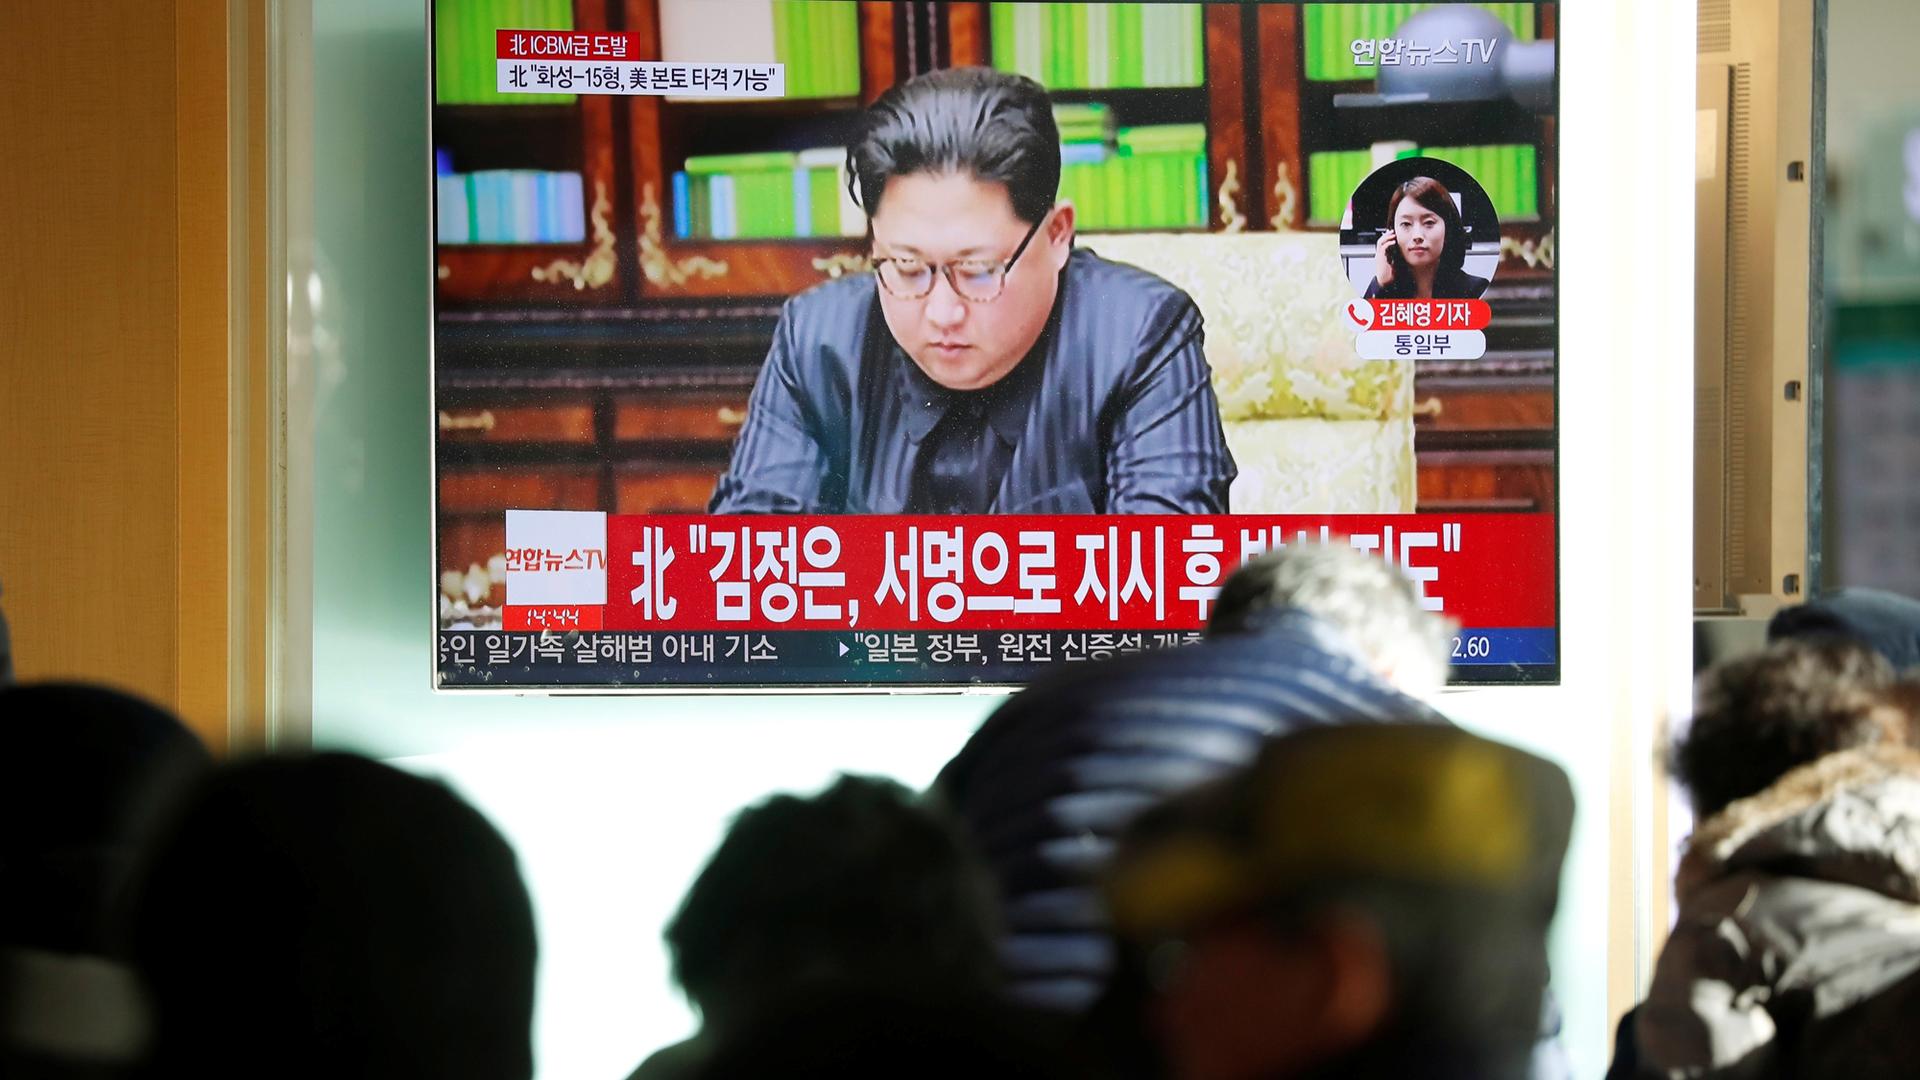 Several people out of focus are in the near ground with a TV monitor in the background showing Kim Jong-un.